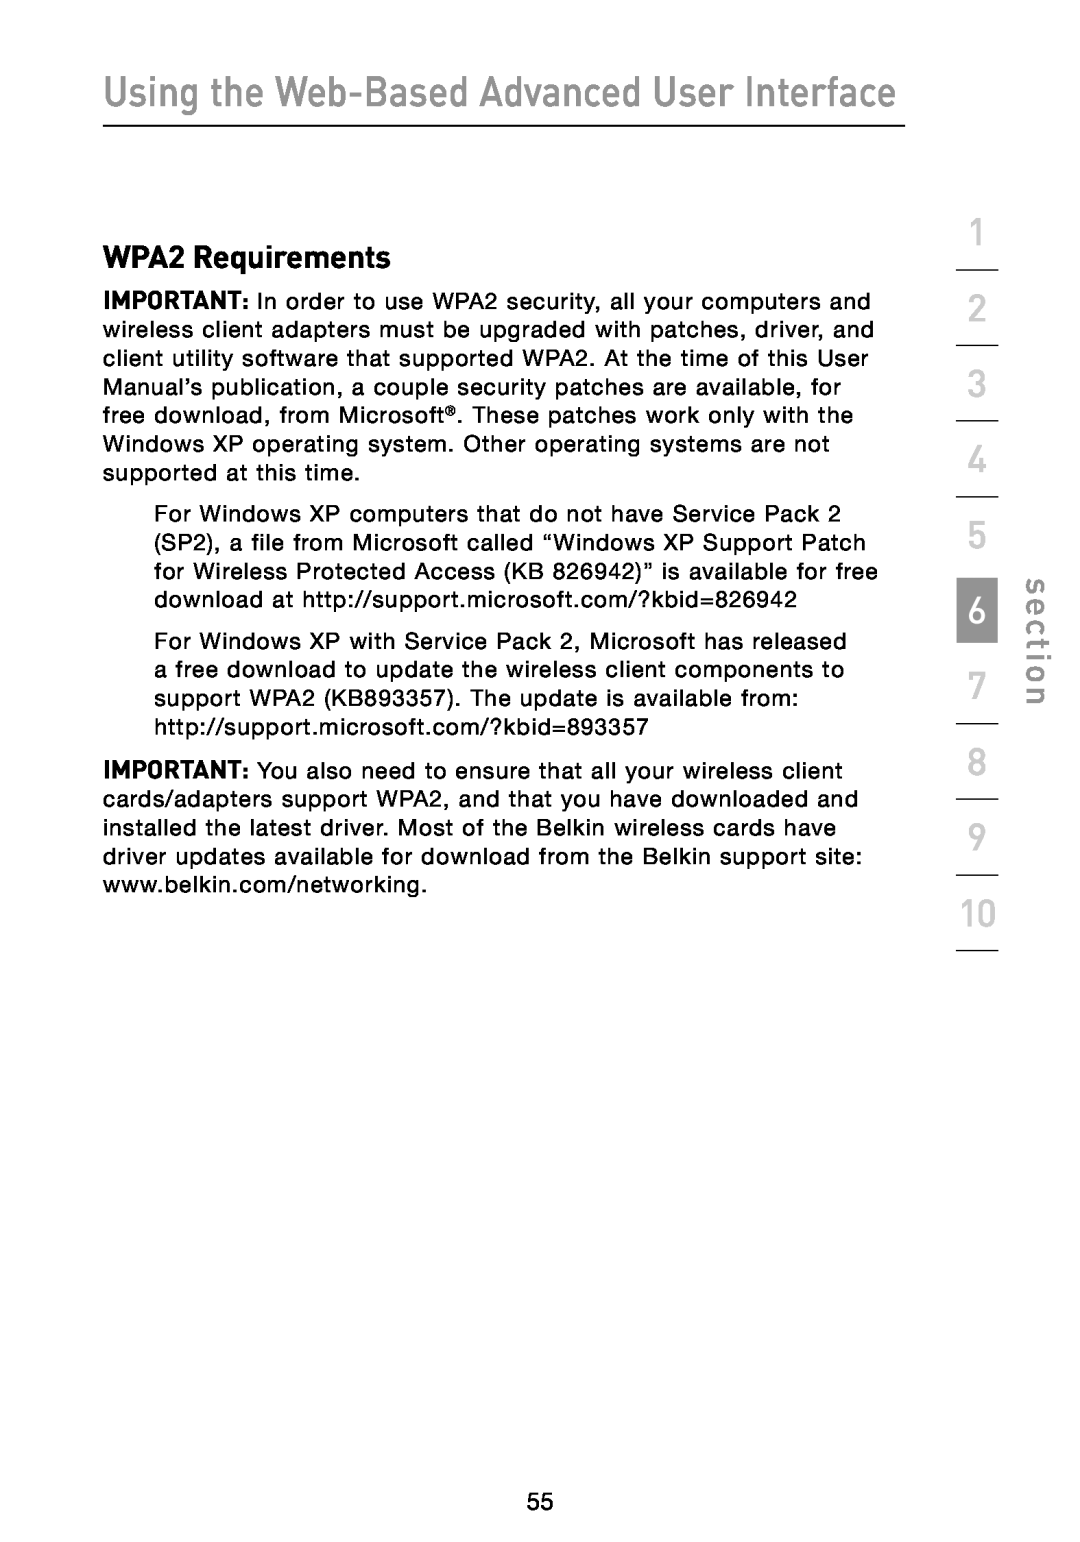 Belkin N1 user manual WPA2 Requirements, Using the Web-Based Advanced User Interface, section 